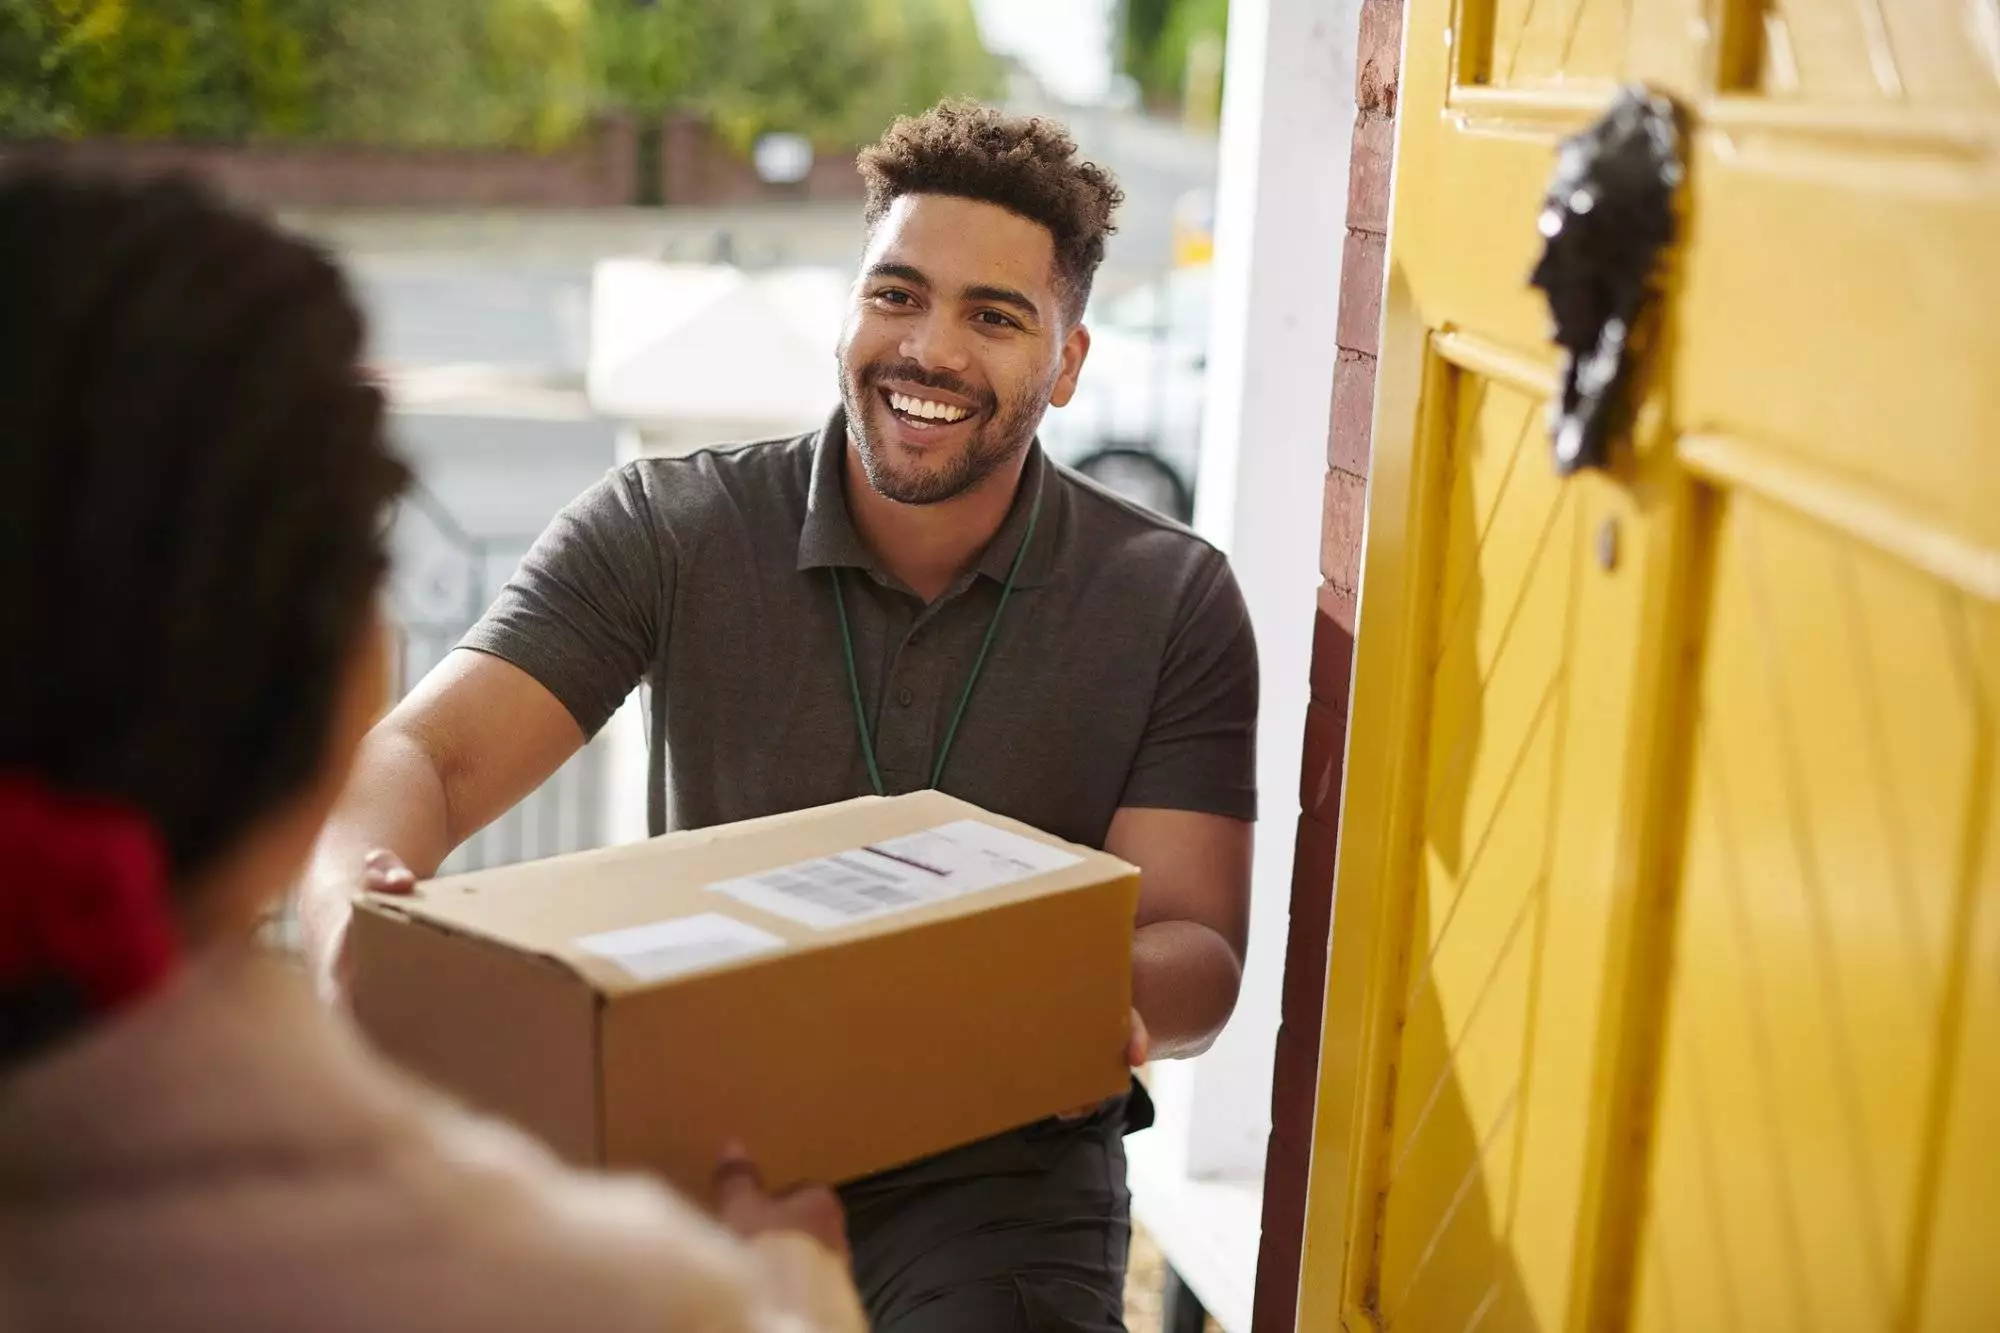 Ship With Confidence With Frisco Shipping Services at the UPS Store